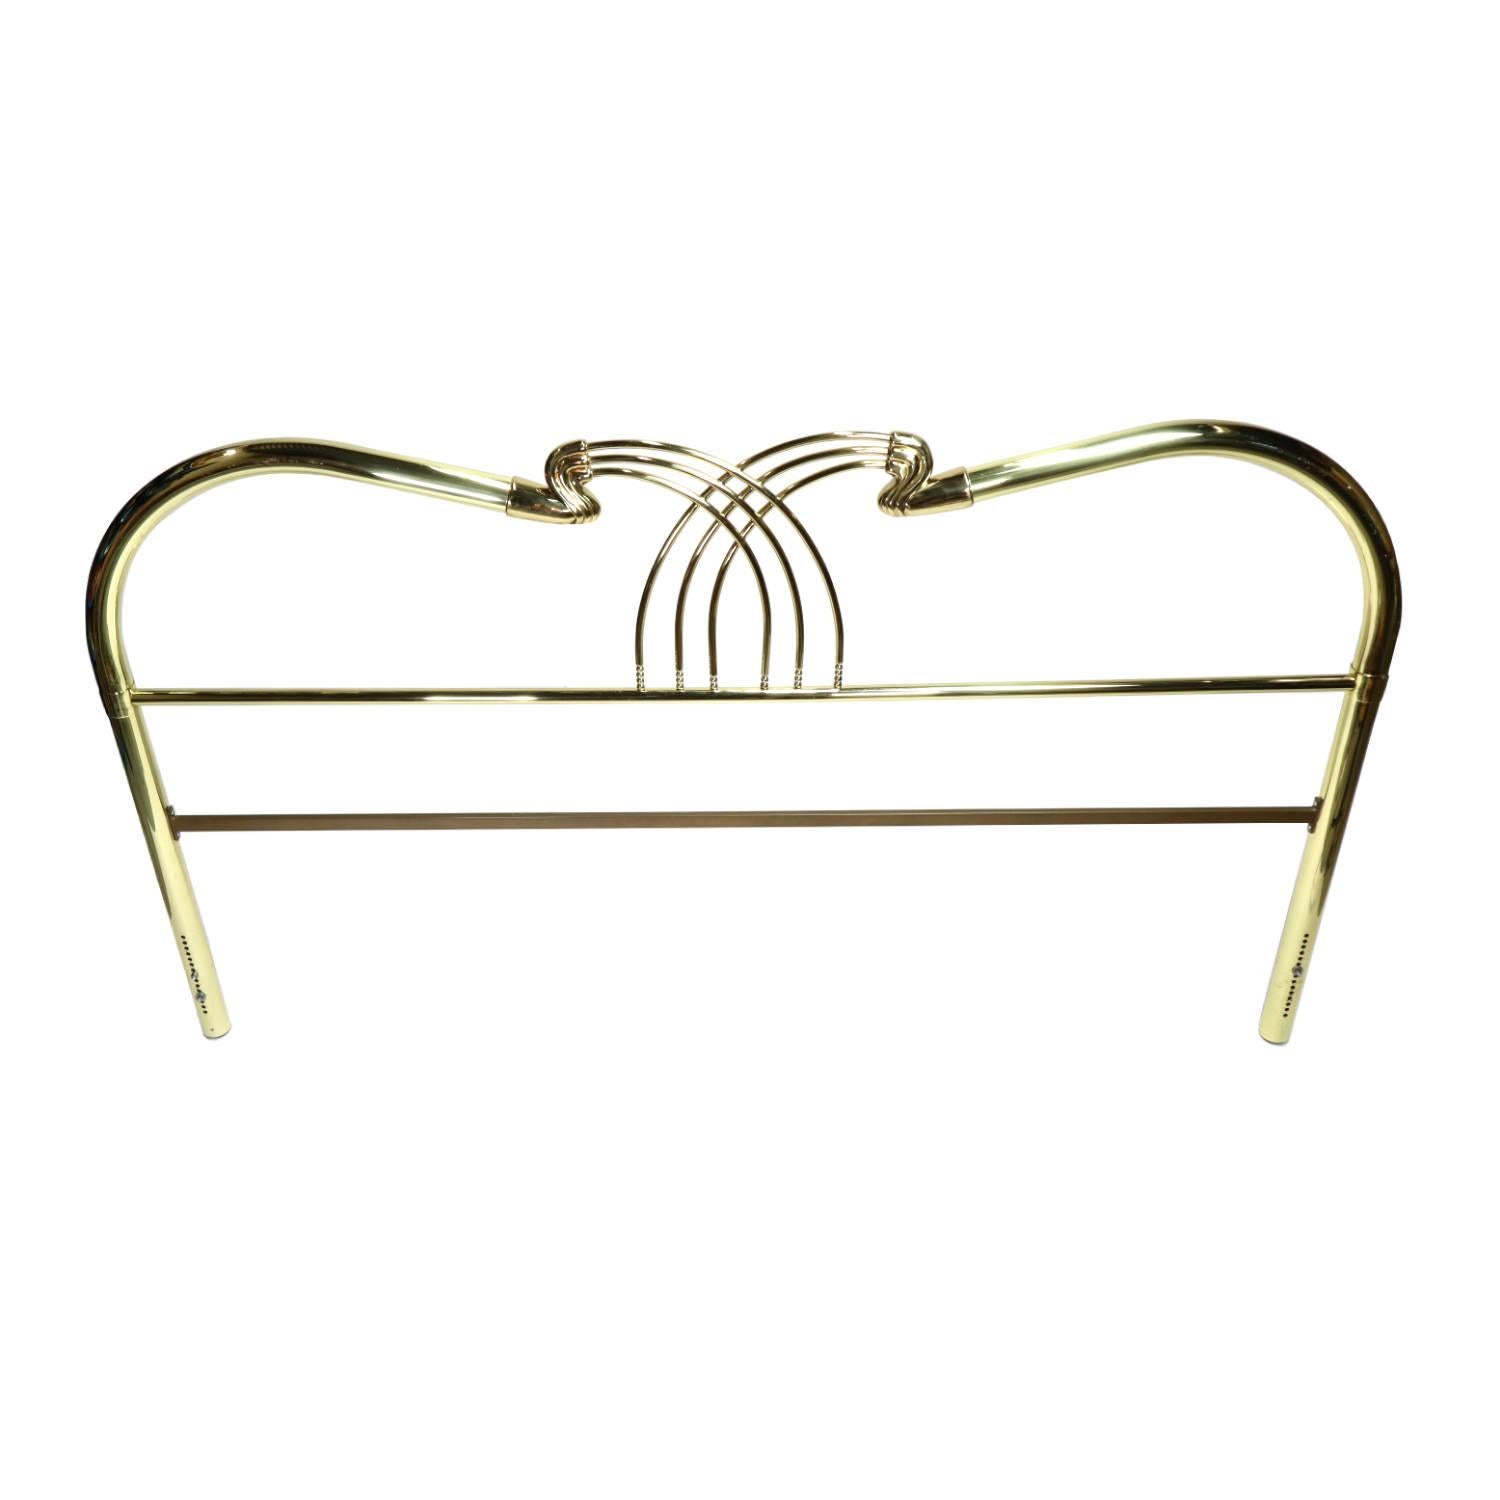 King size Art Deco brass bed headboard. The elegant Hollywood Regency headboard features graceful curves at the peak of the arch. The center of the headboard is embellished with a series of brass beads resembling an abacus. The brilliant gold finish